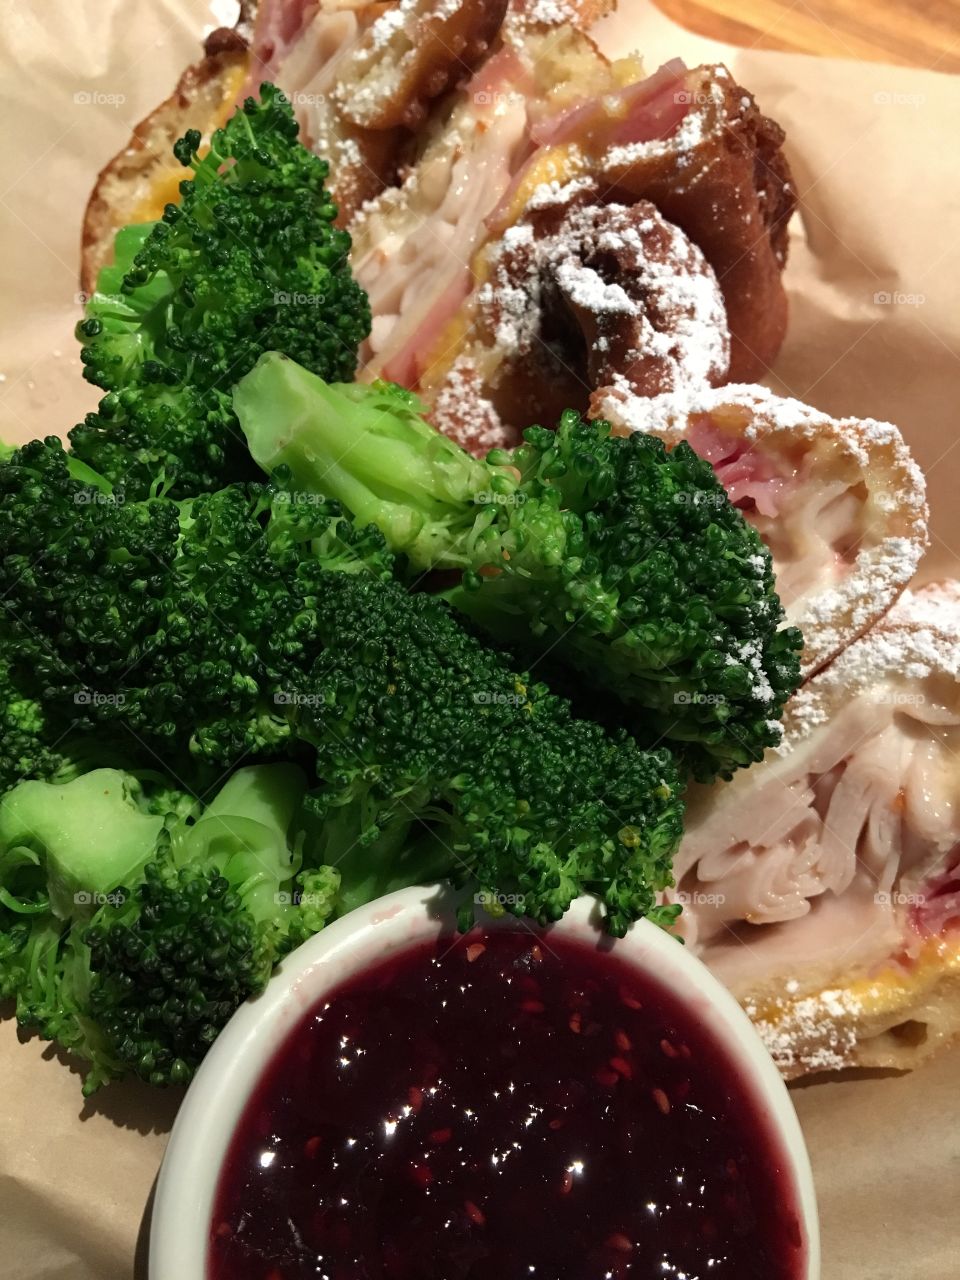 Steamed Broccoli and Monte Cristo with Raspberry Dipping Sauce 